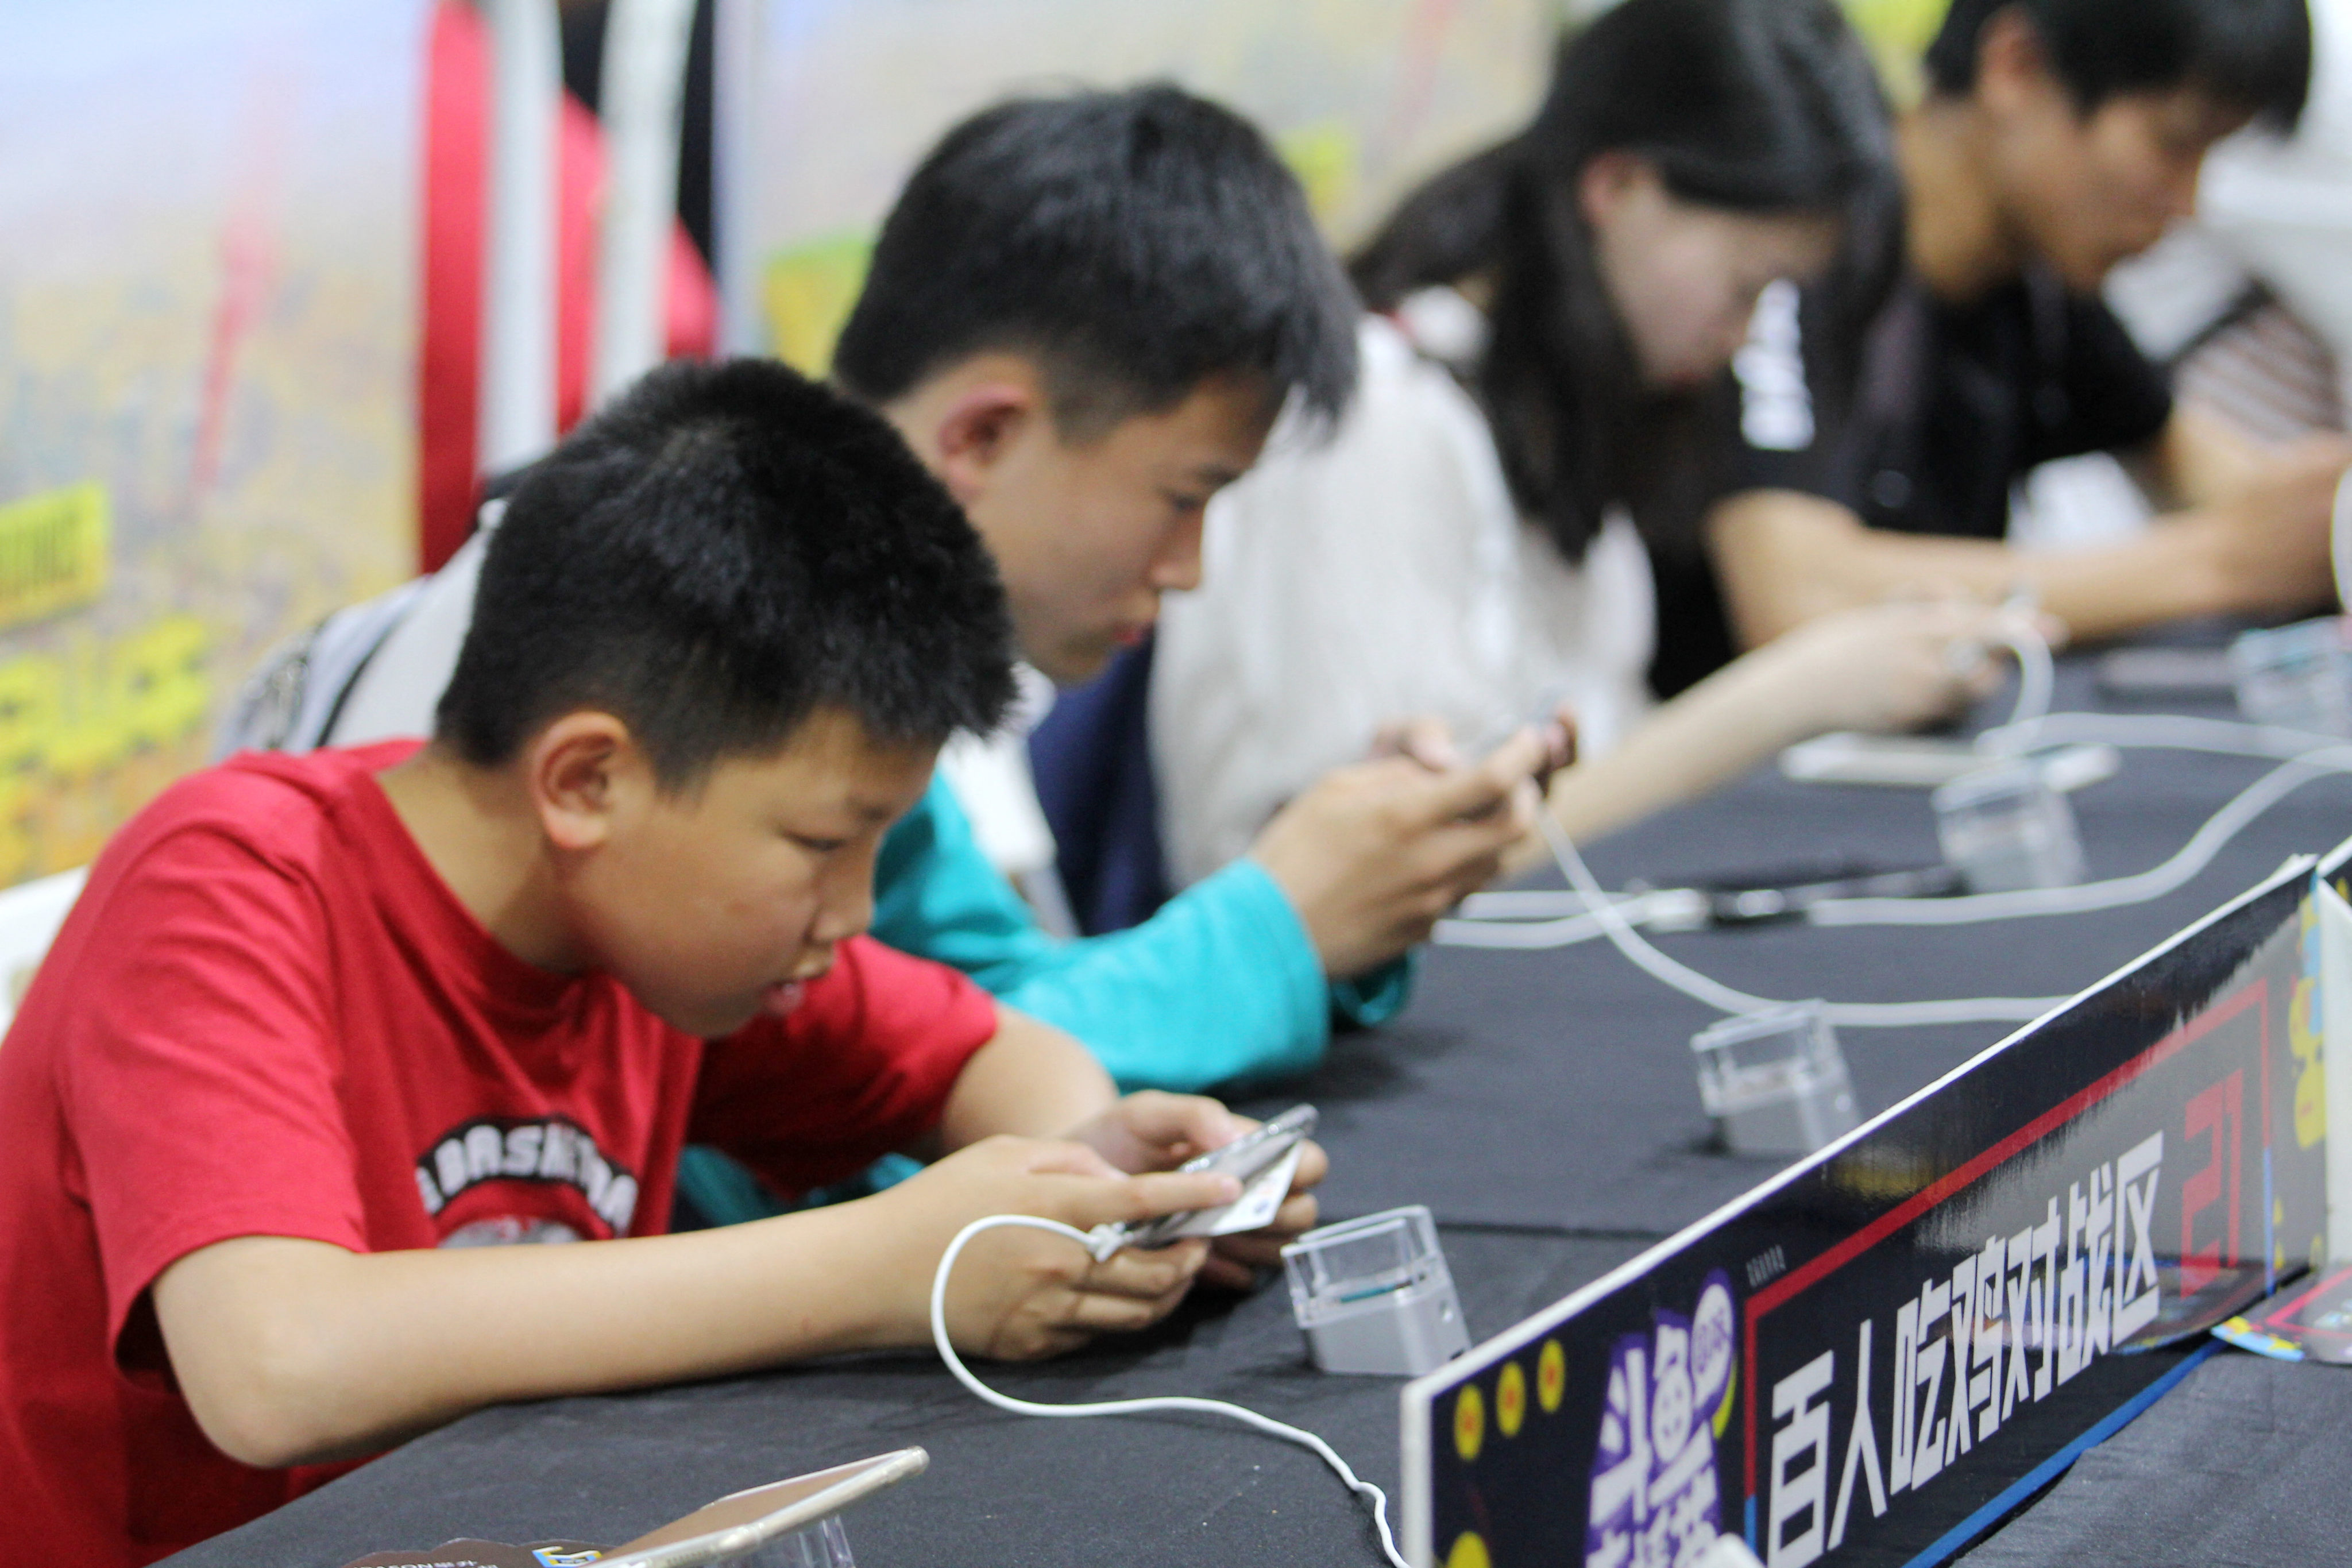 Young Chinese mobile gamer. Photo: Imaginechina via AFP